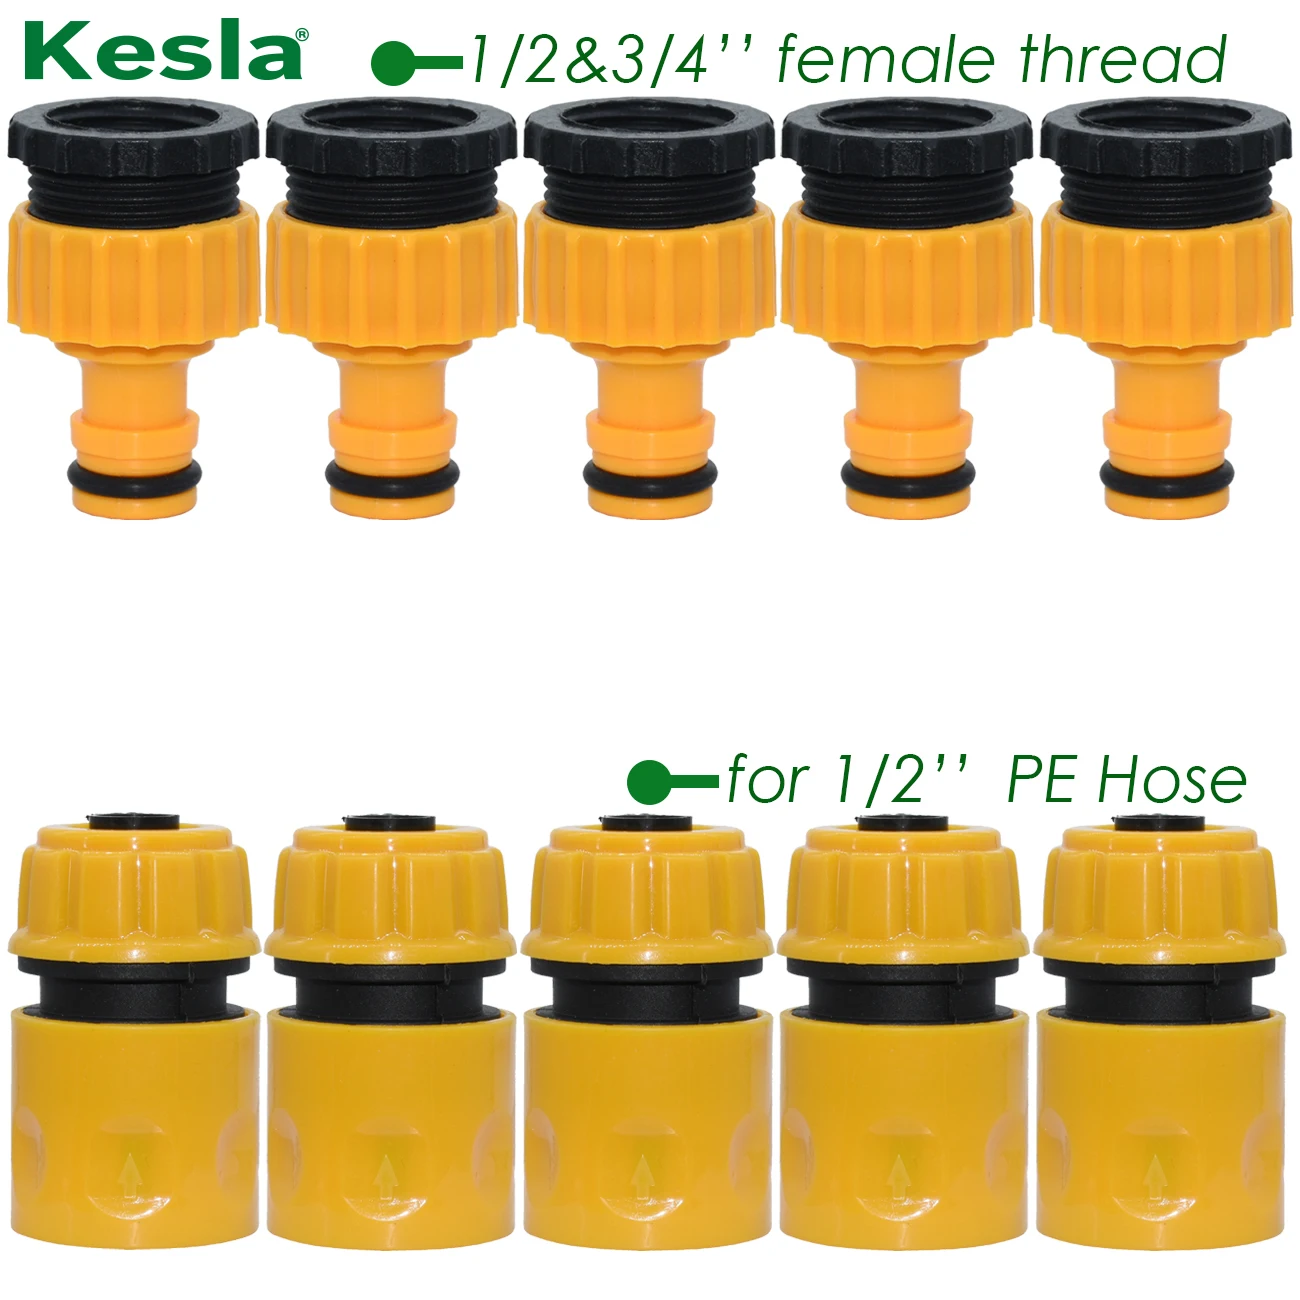 10PCS(5PAIRS) 3/4 &1/2 inch Graden Hose Tap Connector Threaded Faucet Adapter & Quick Connect fitting for 1/2 Hose Pipe Tubing